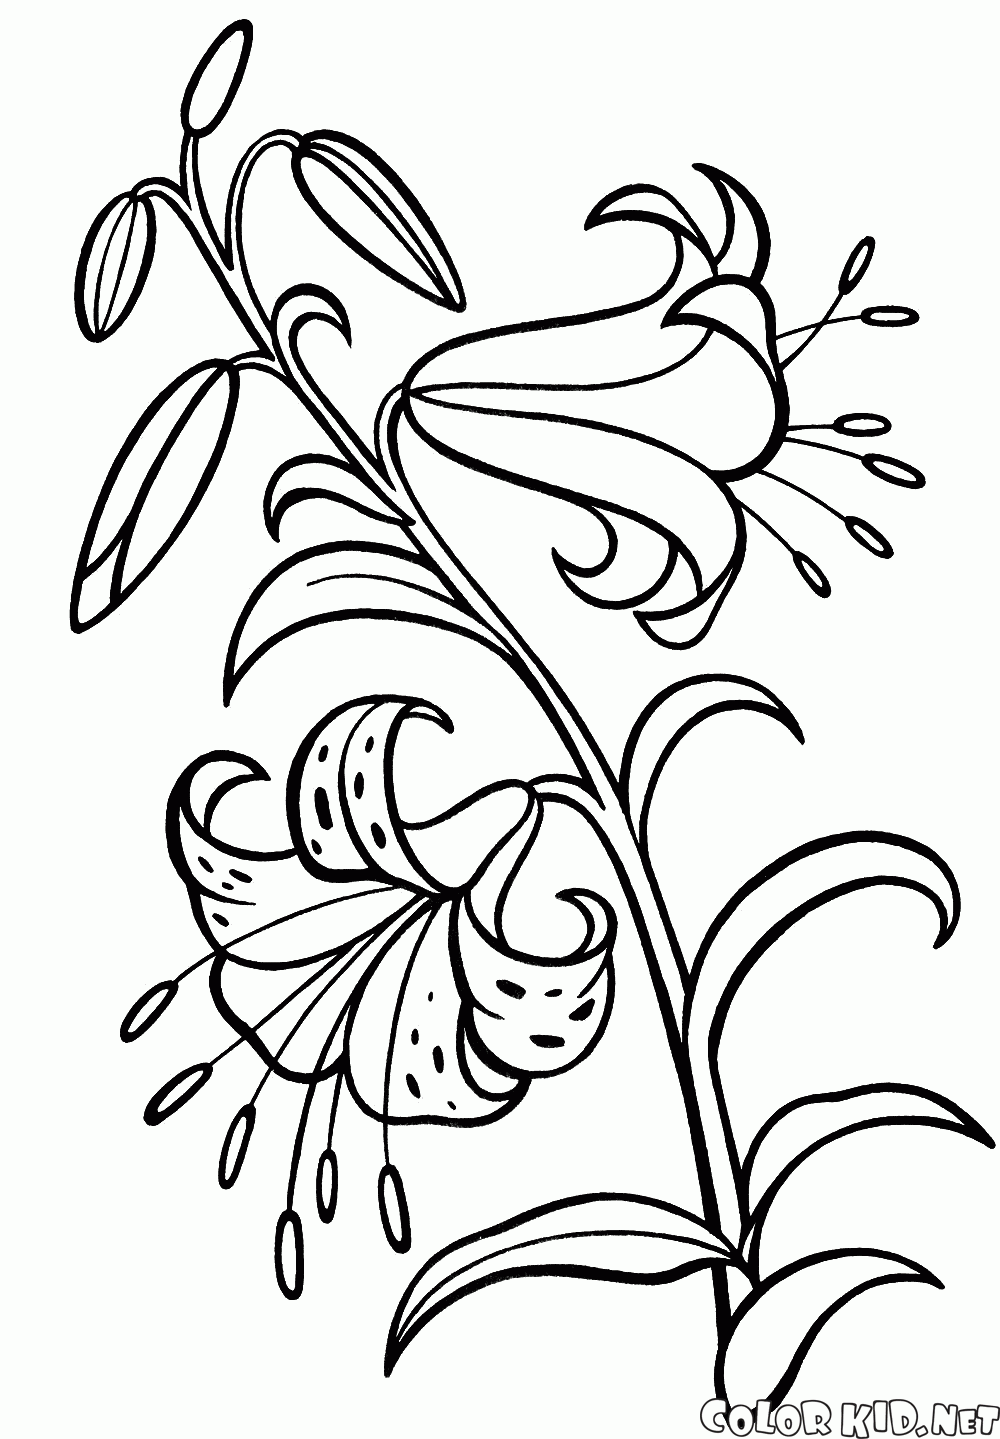 Coloring page - Lily